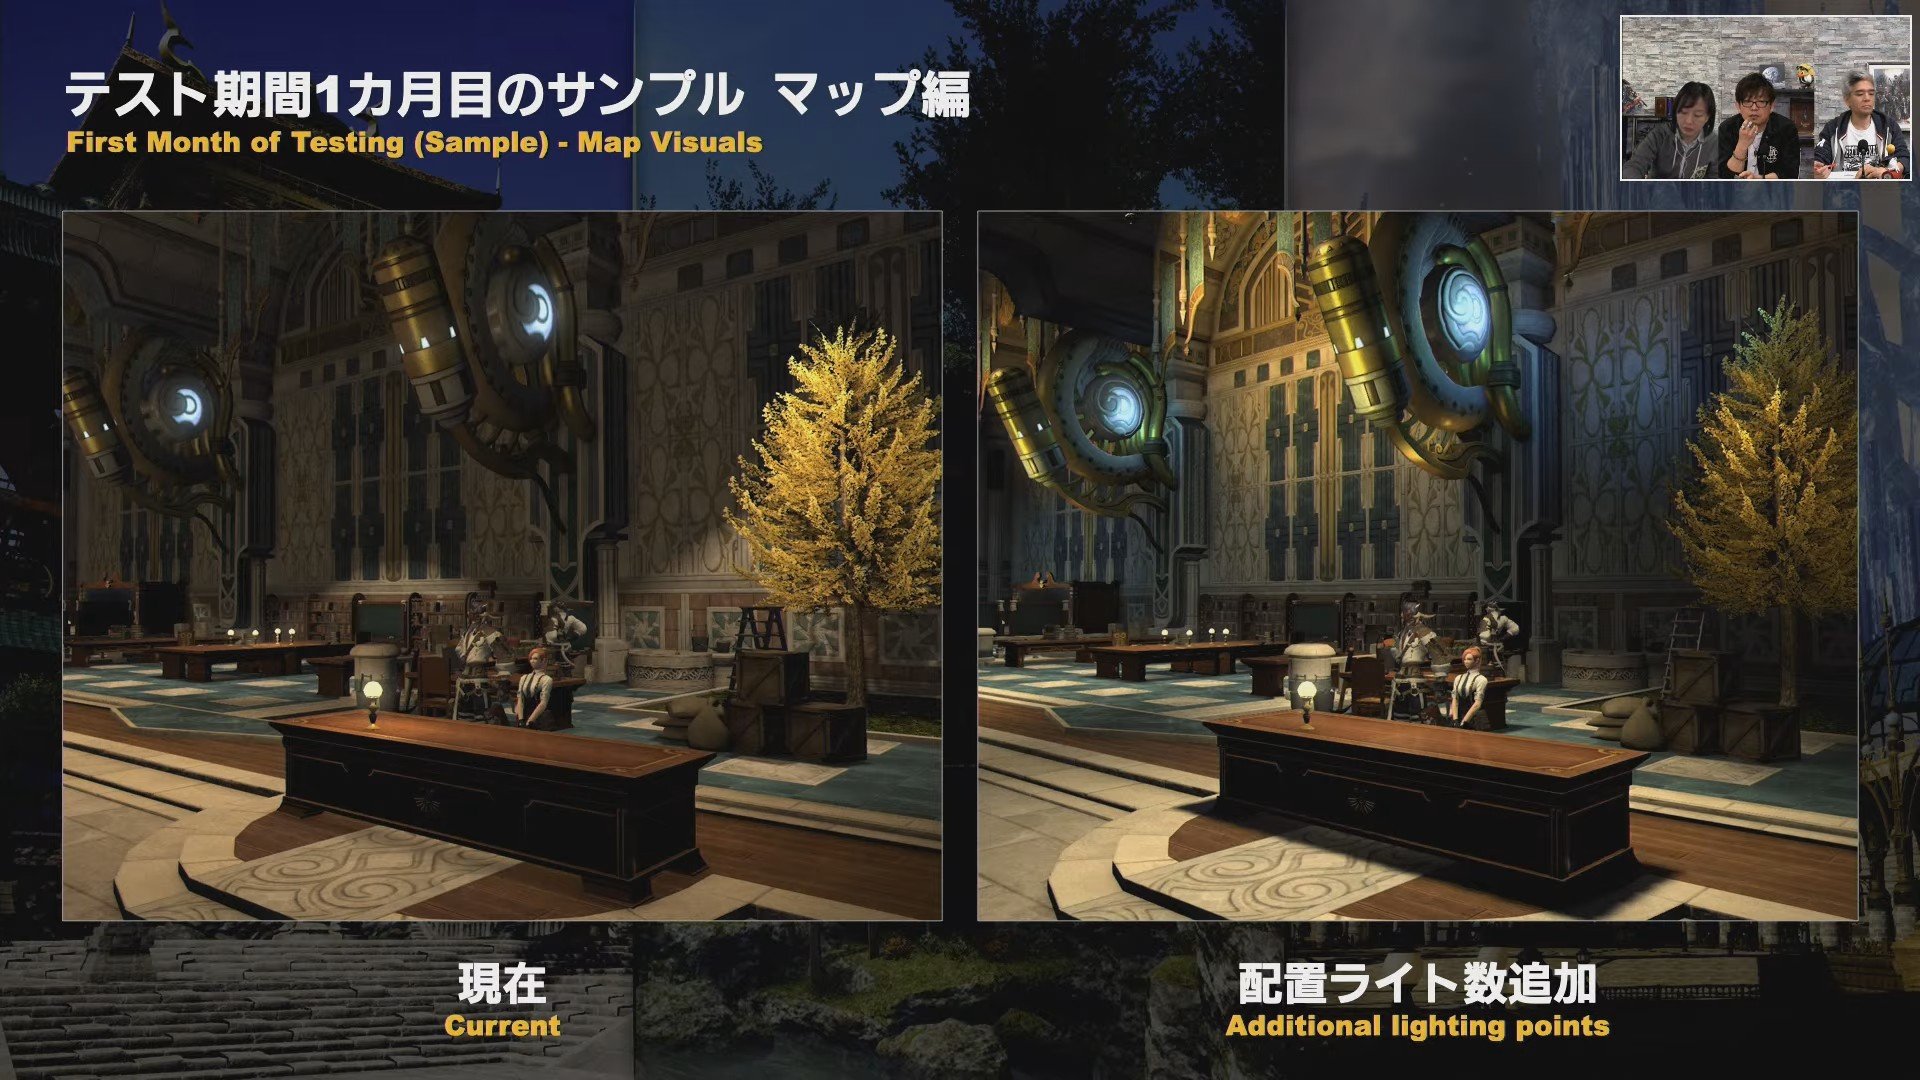 Final Fantasy XIV outlines the next 10 years RPG advancements